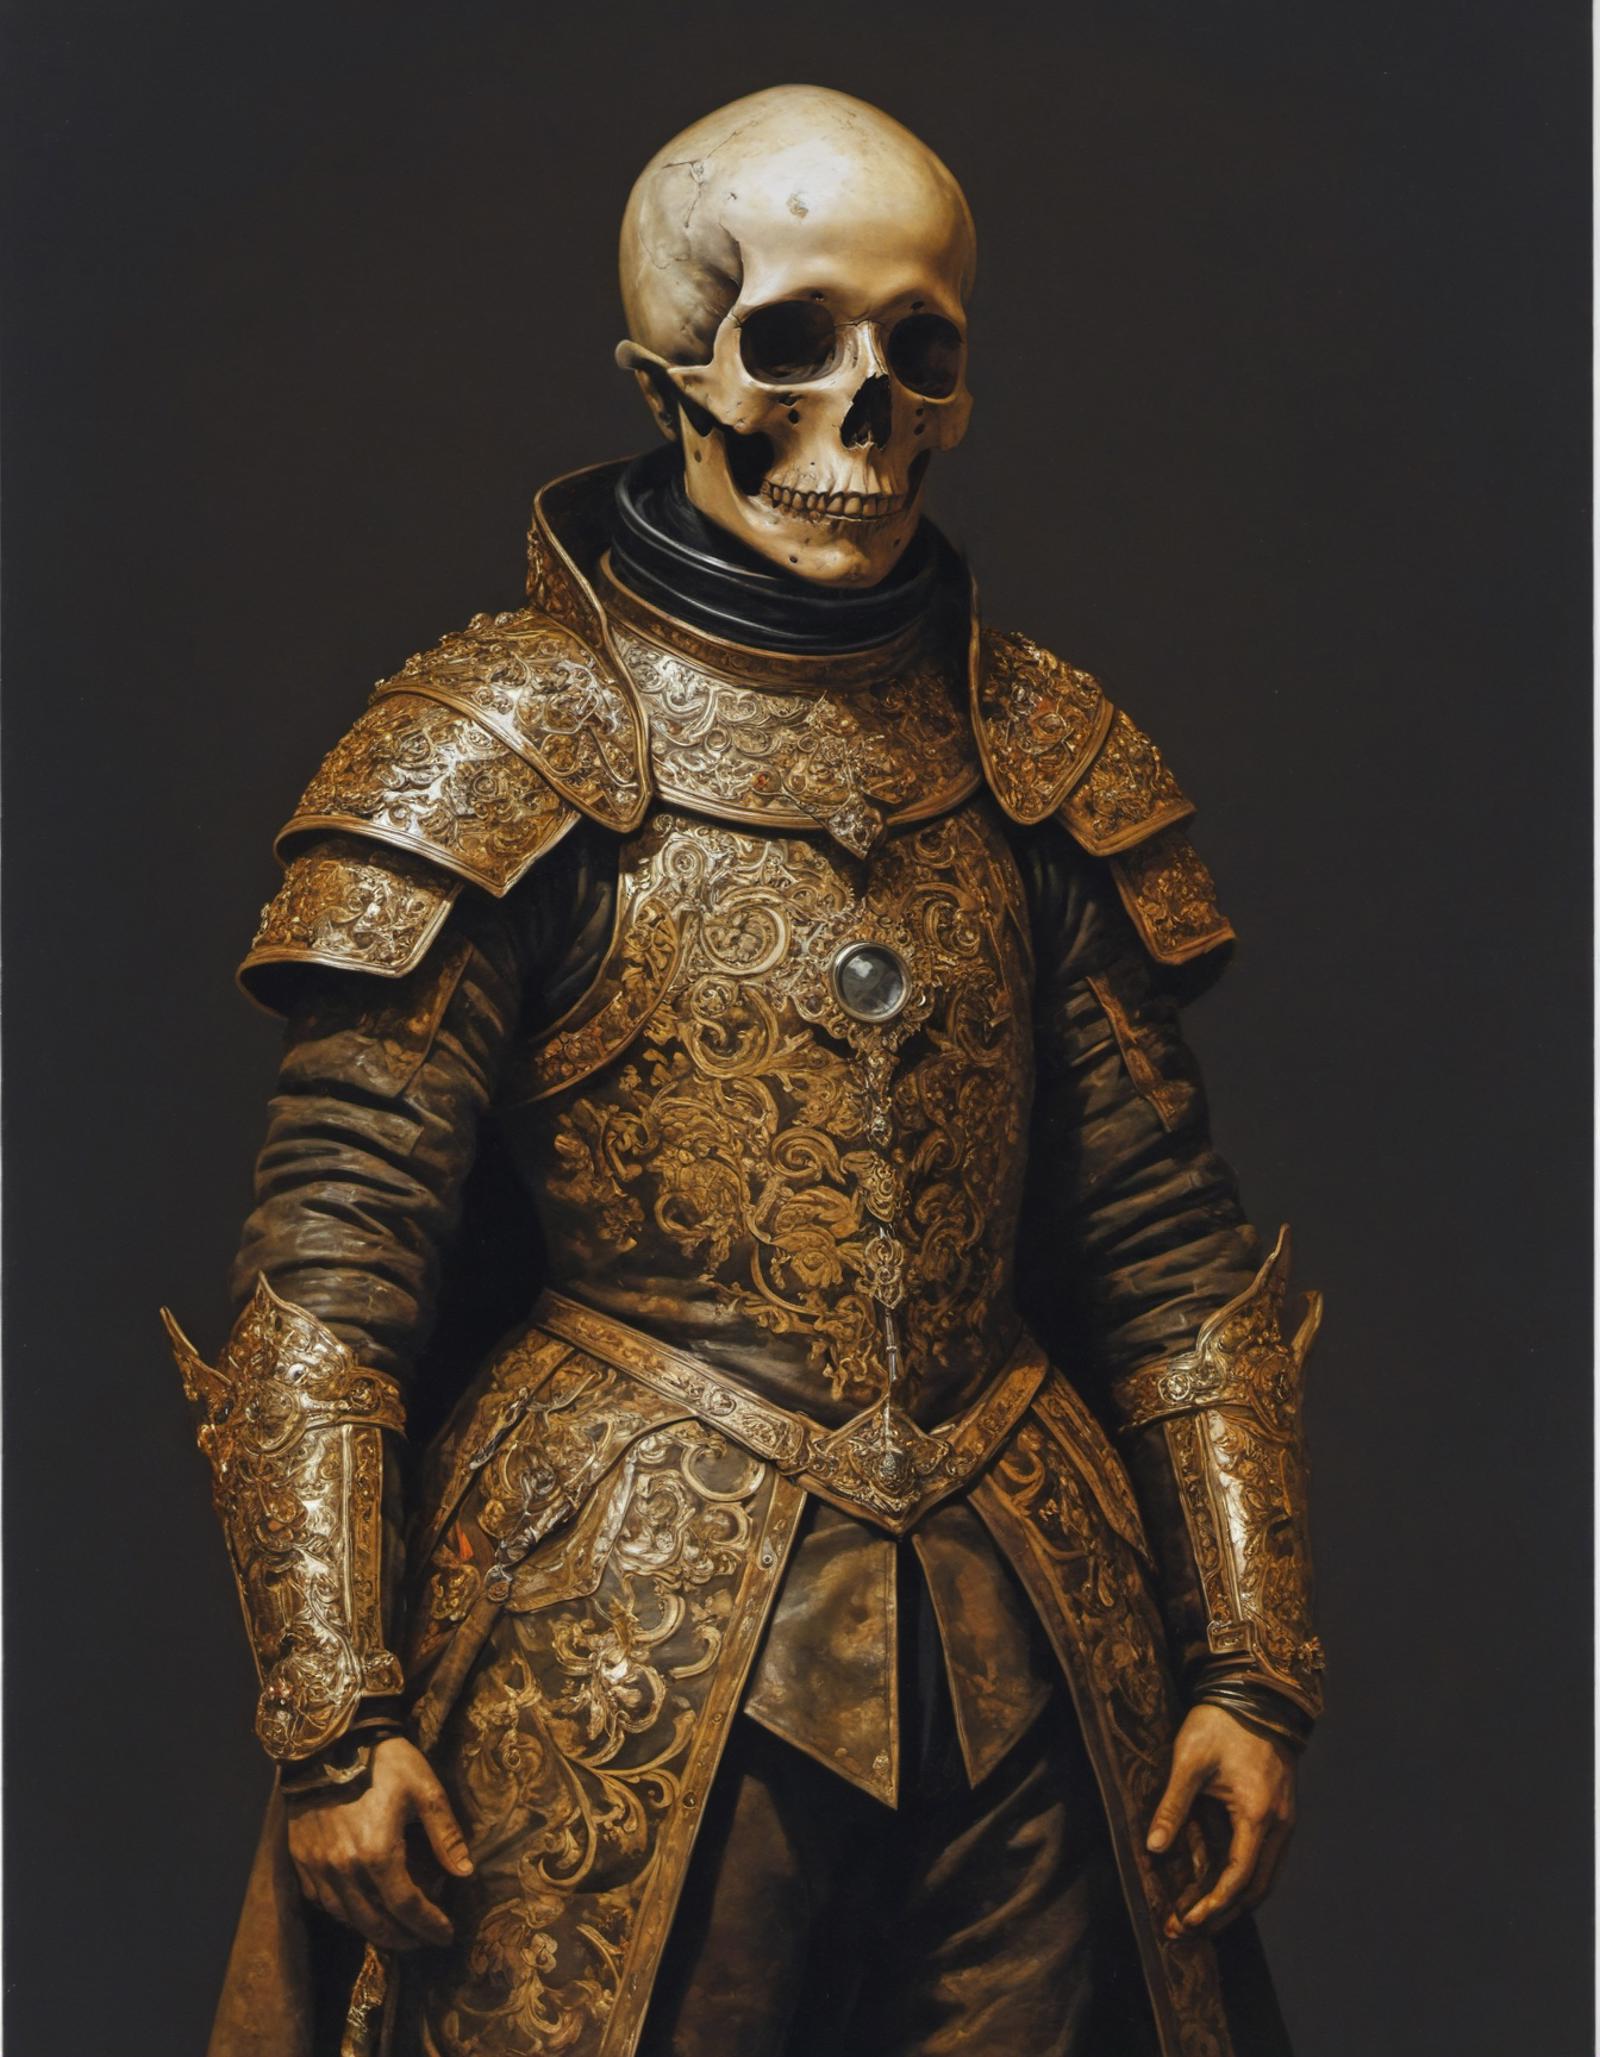 A skeleton in a suit of armor with a skull head and golden armor.